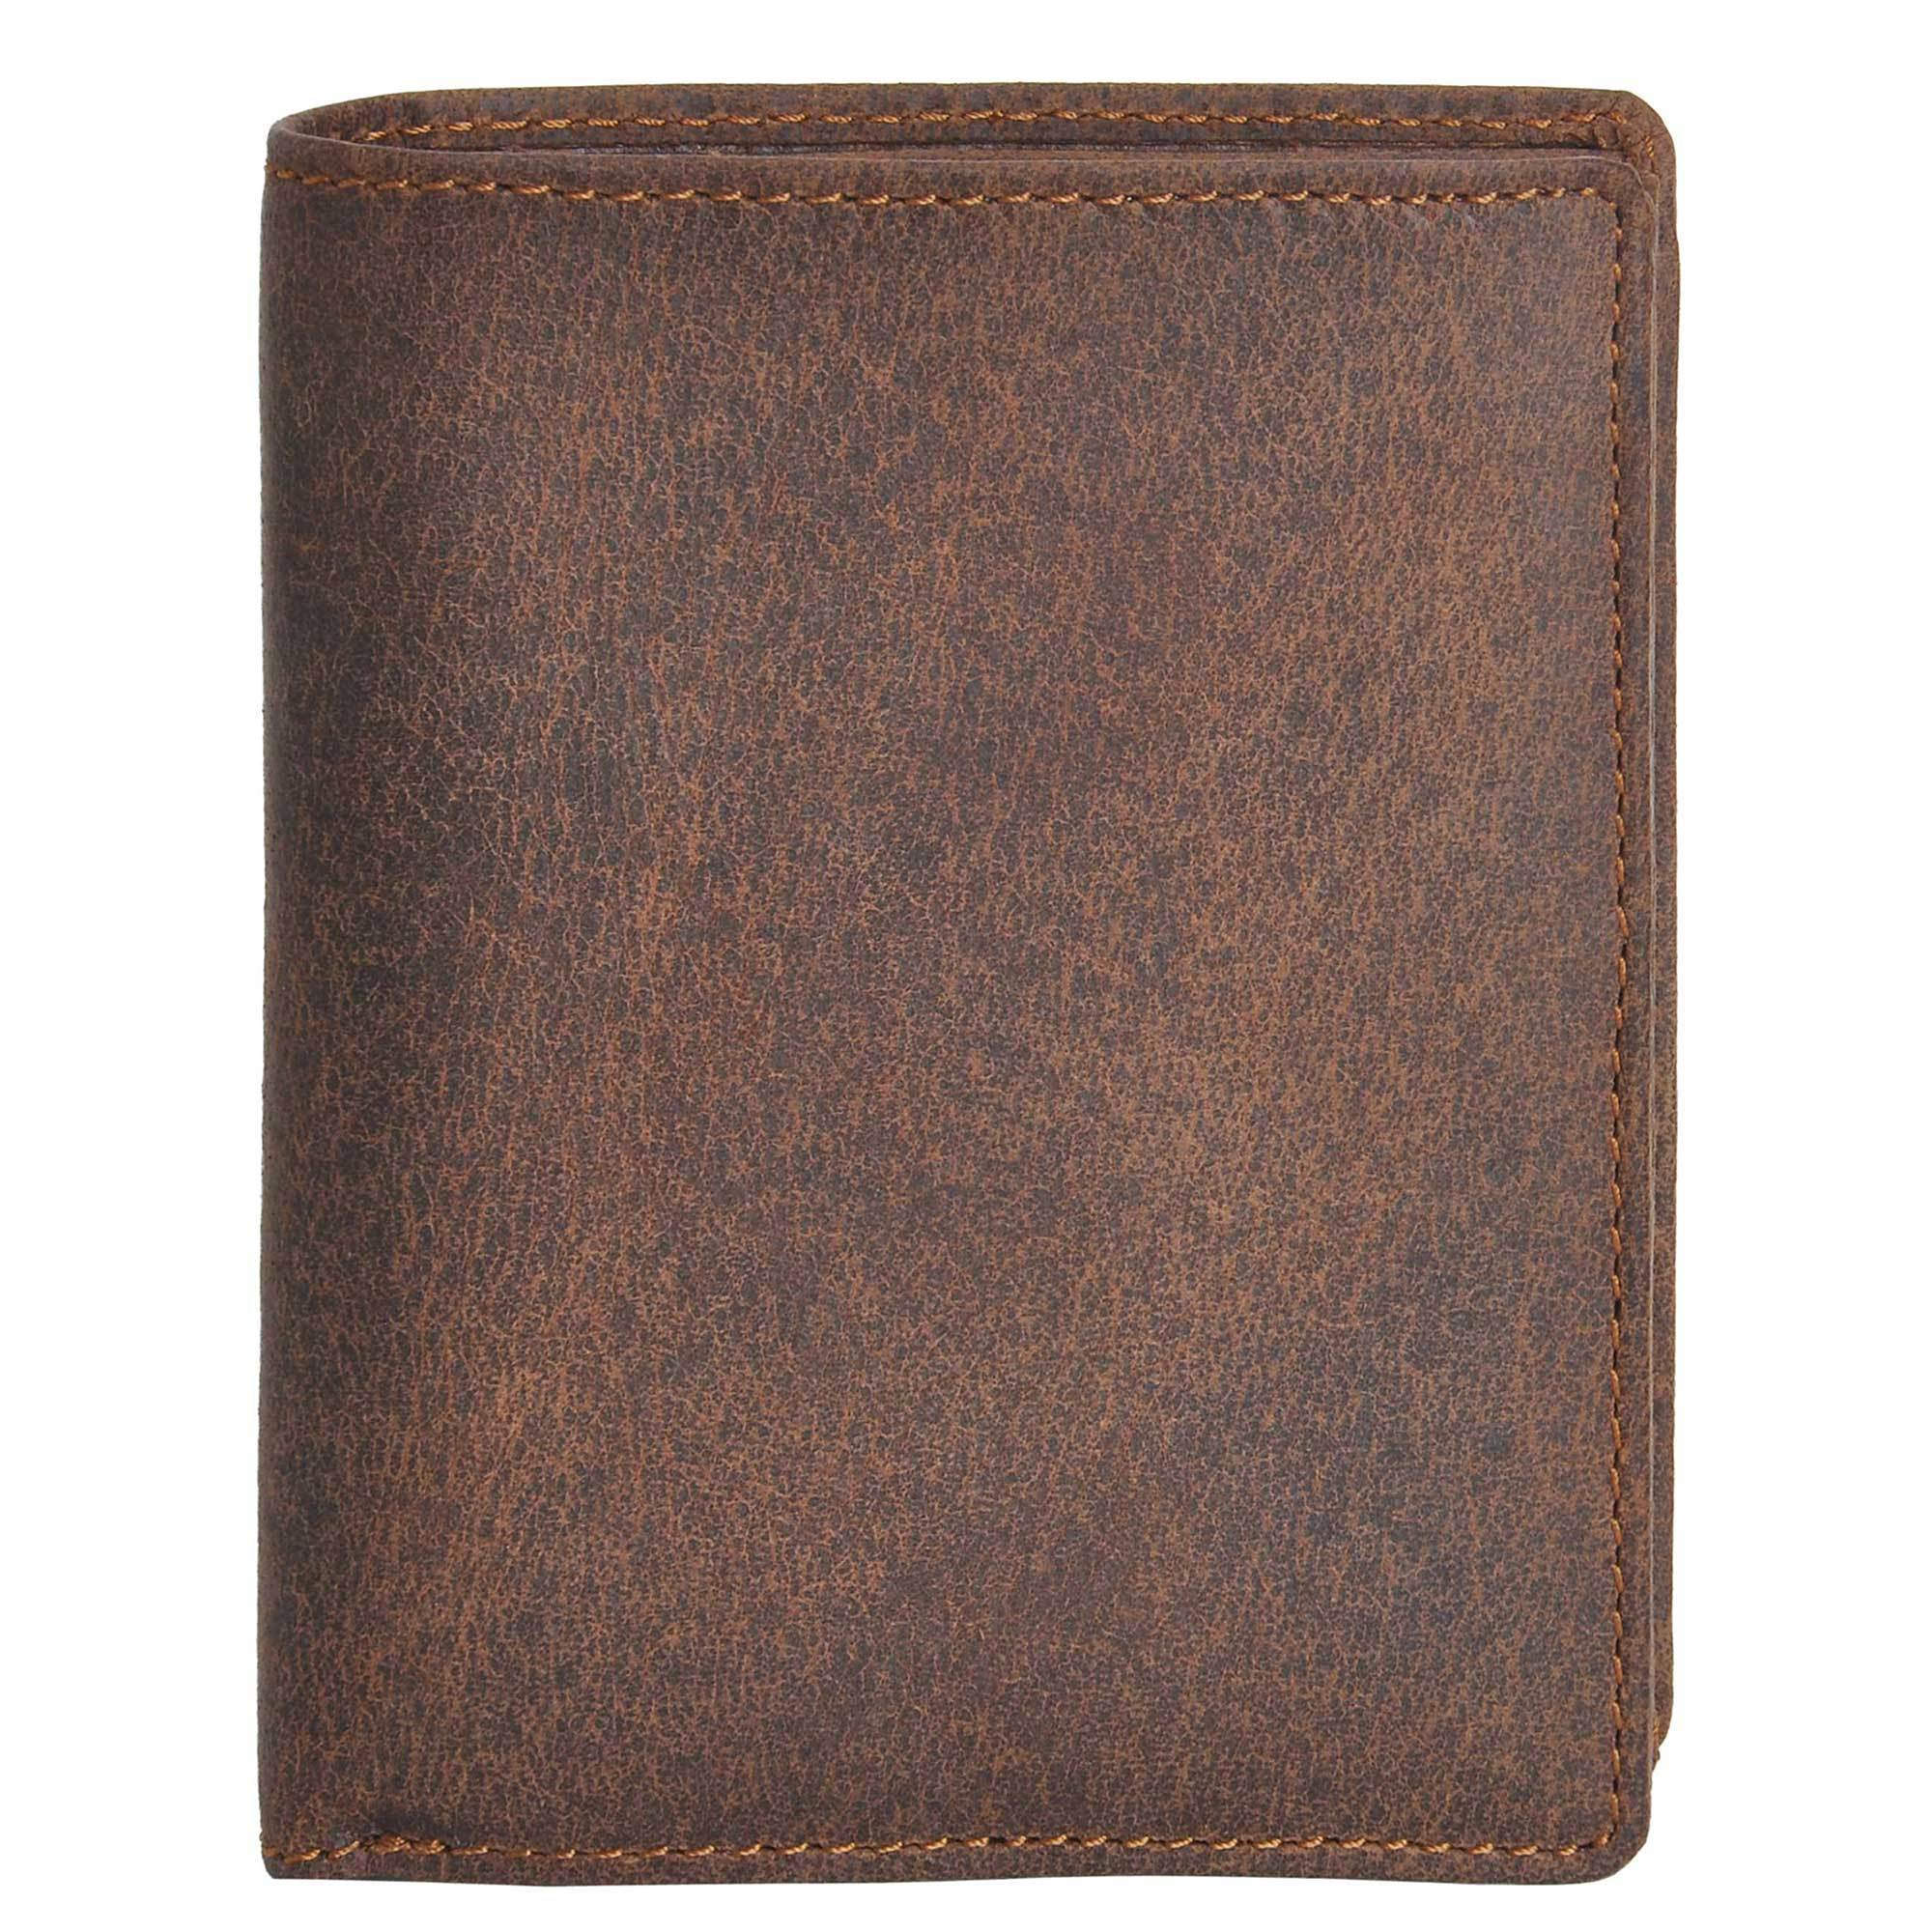 DiLoro Men's Vertical Buffalo Leather Bifold Flip ID Zip Coin Wallet in Dark Hunter Brown with RFID Protection - Front View